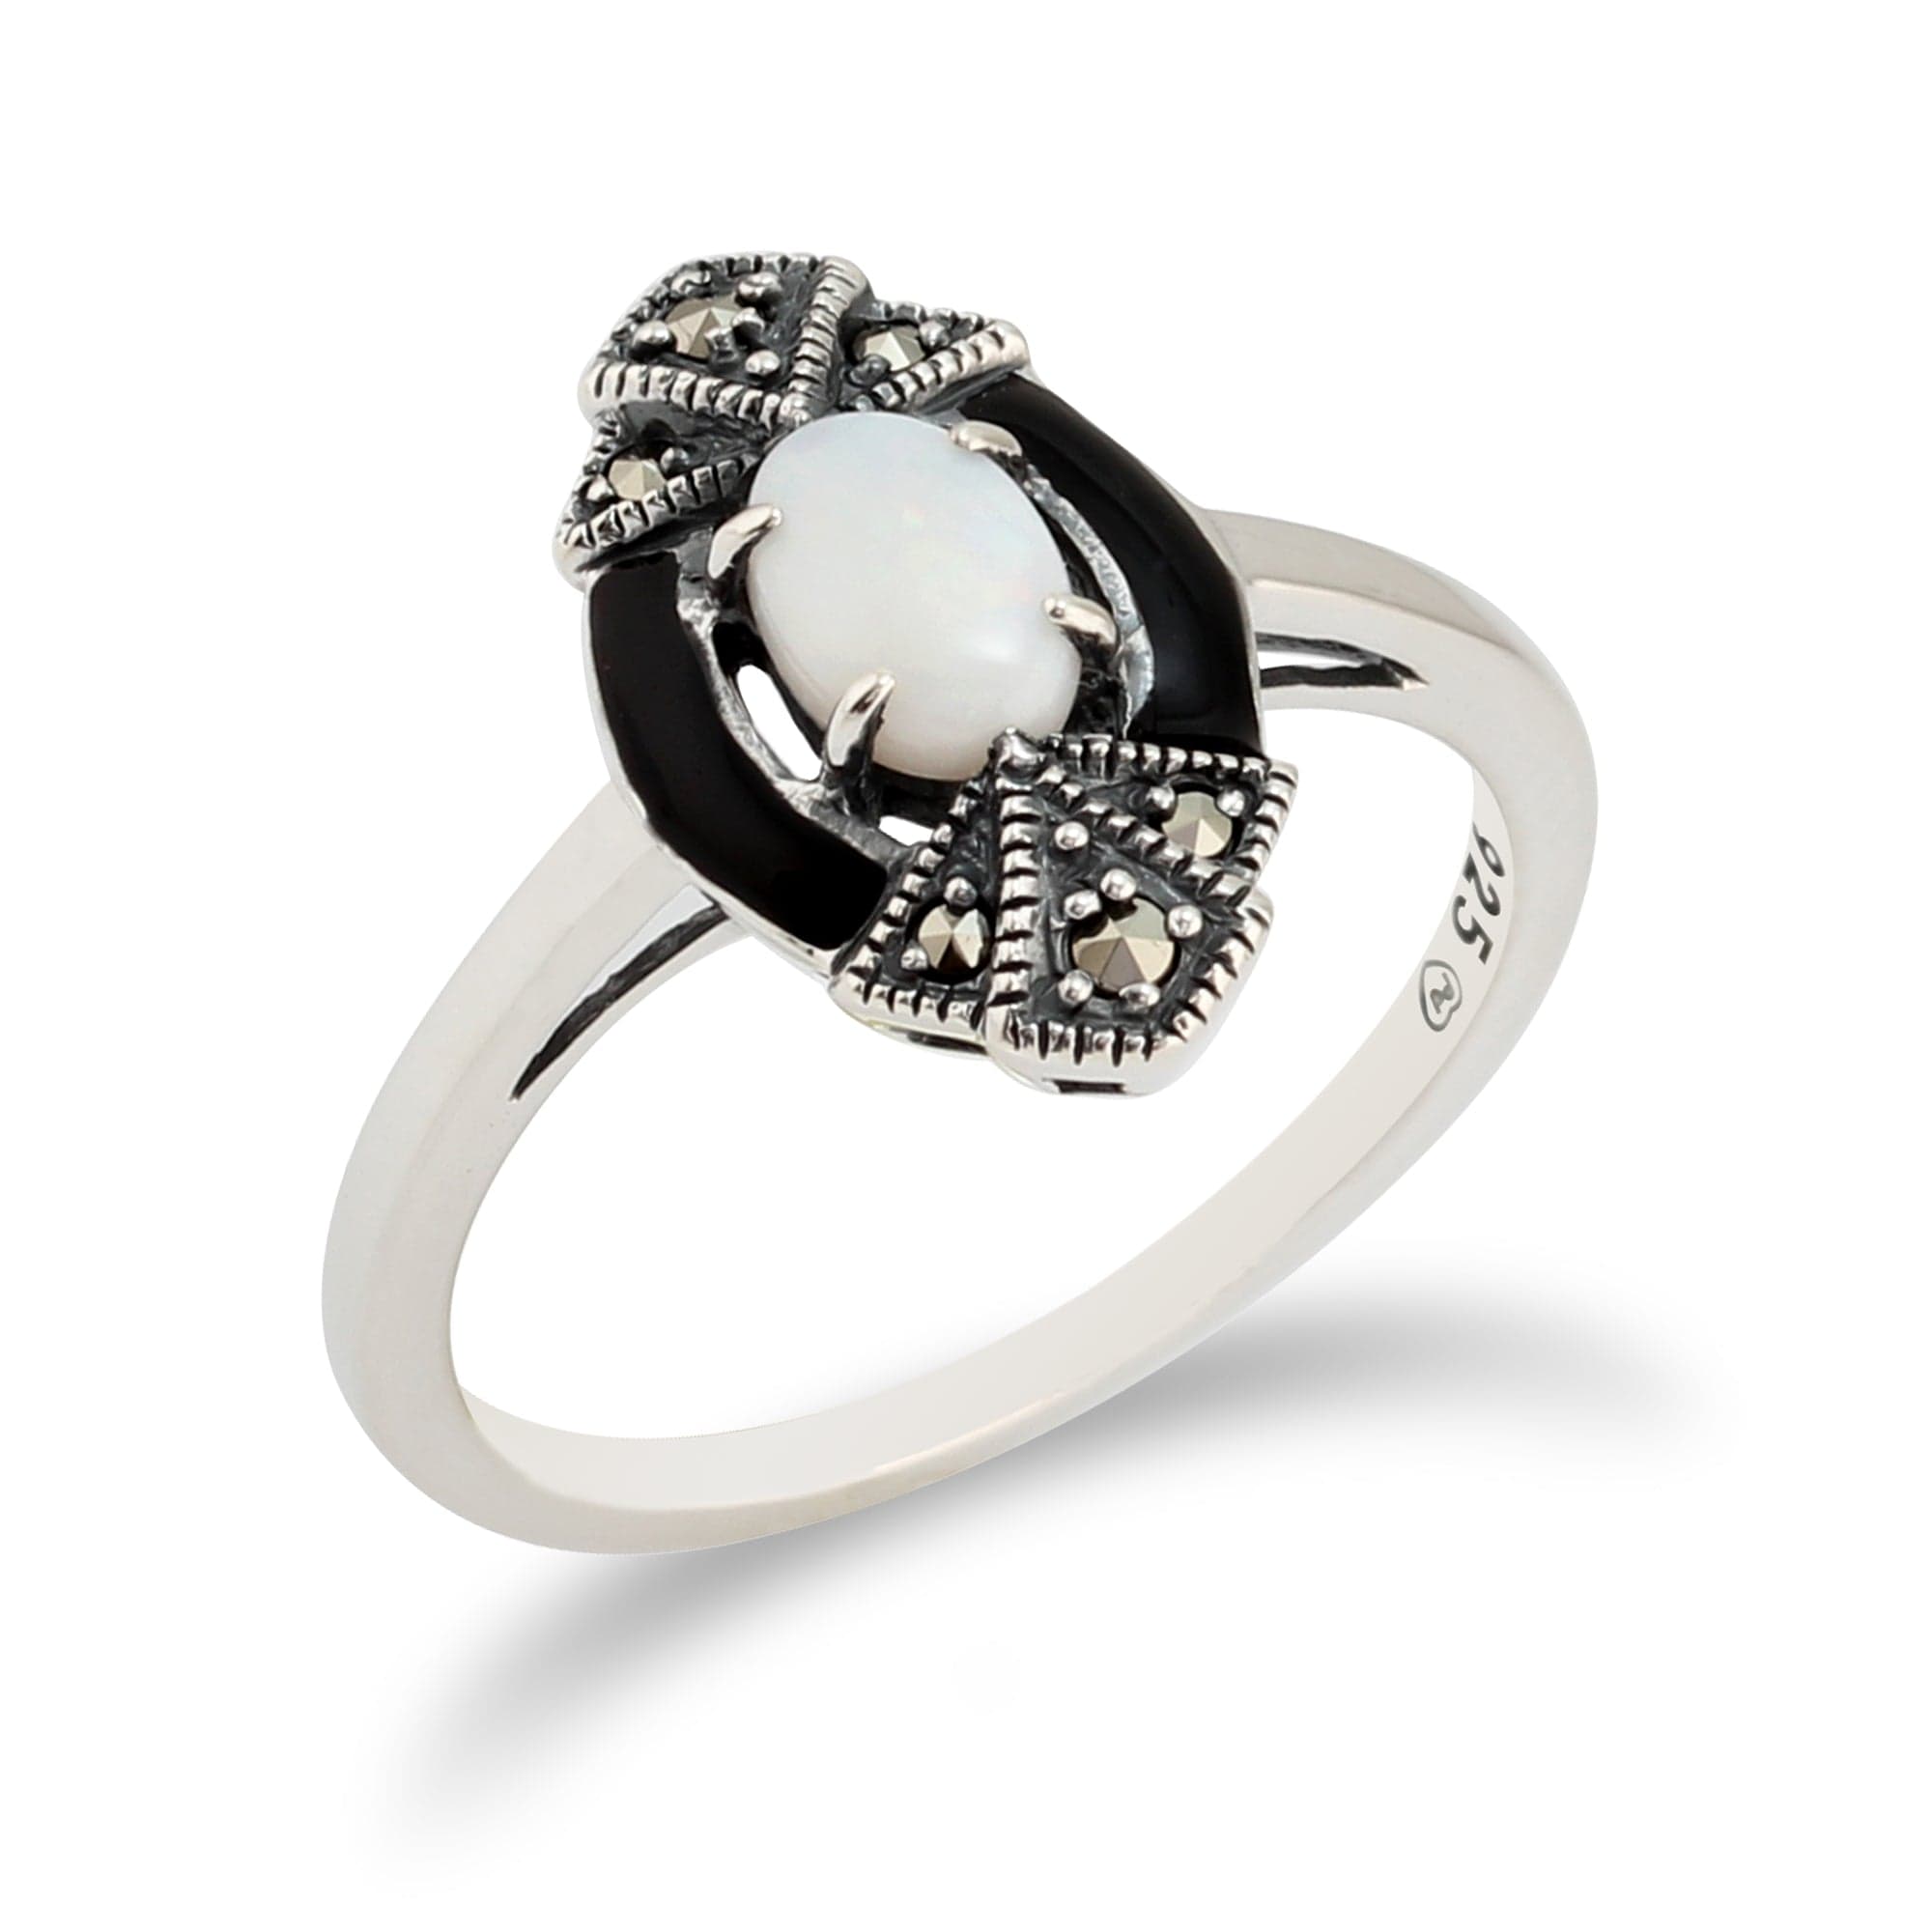 27089 Art Deco Style Oval Opal, Marcasite & Black Enamel Marquise Ring In Sterling Silver 4